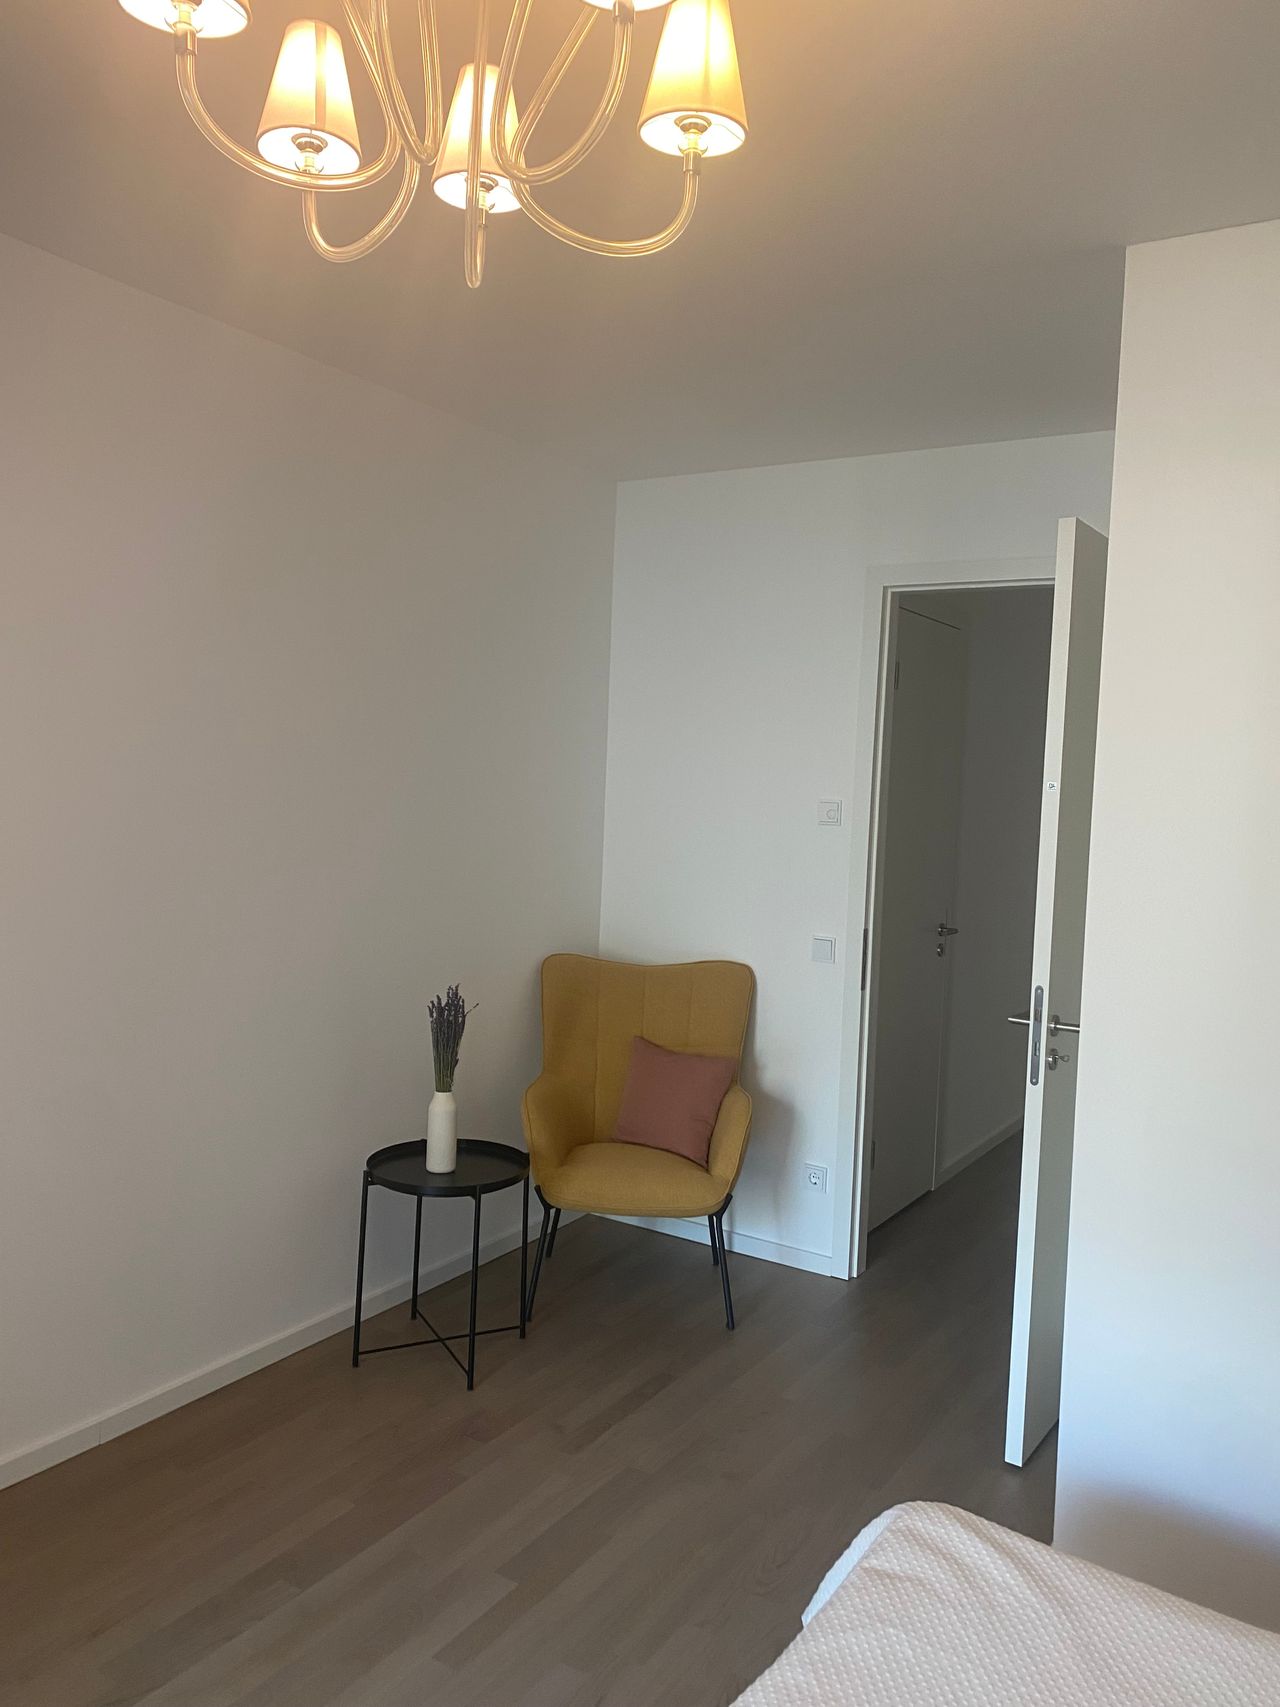 Perfect flat located in front of Berliner Zoo